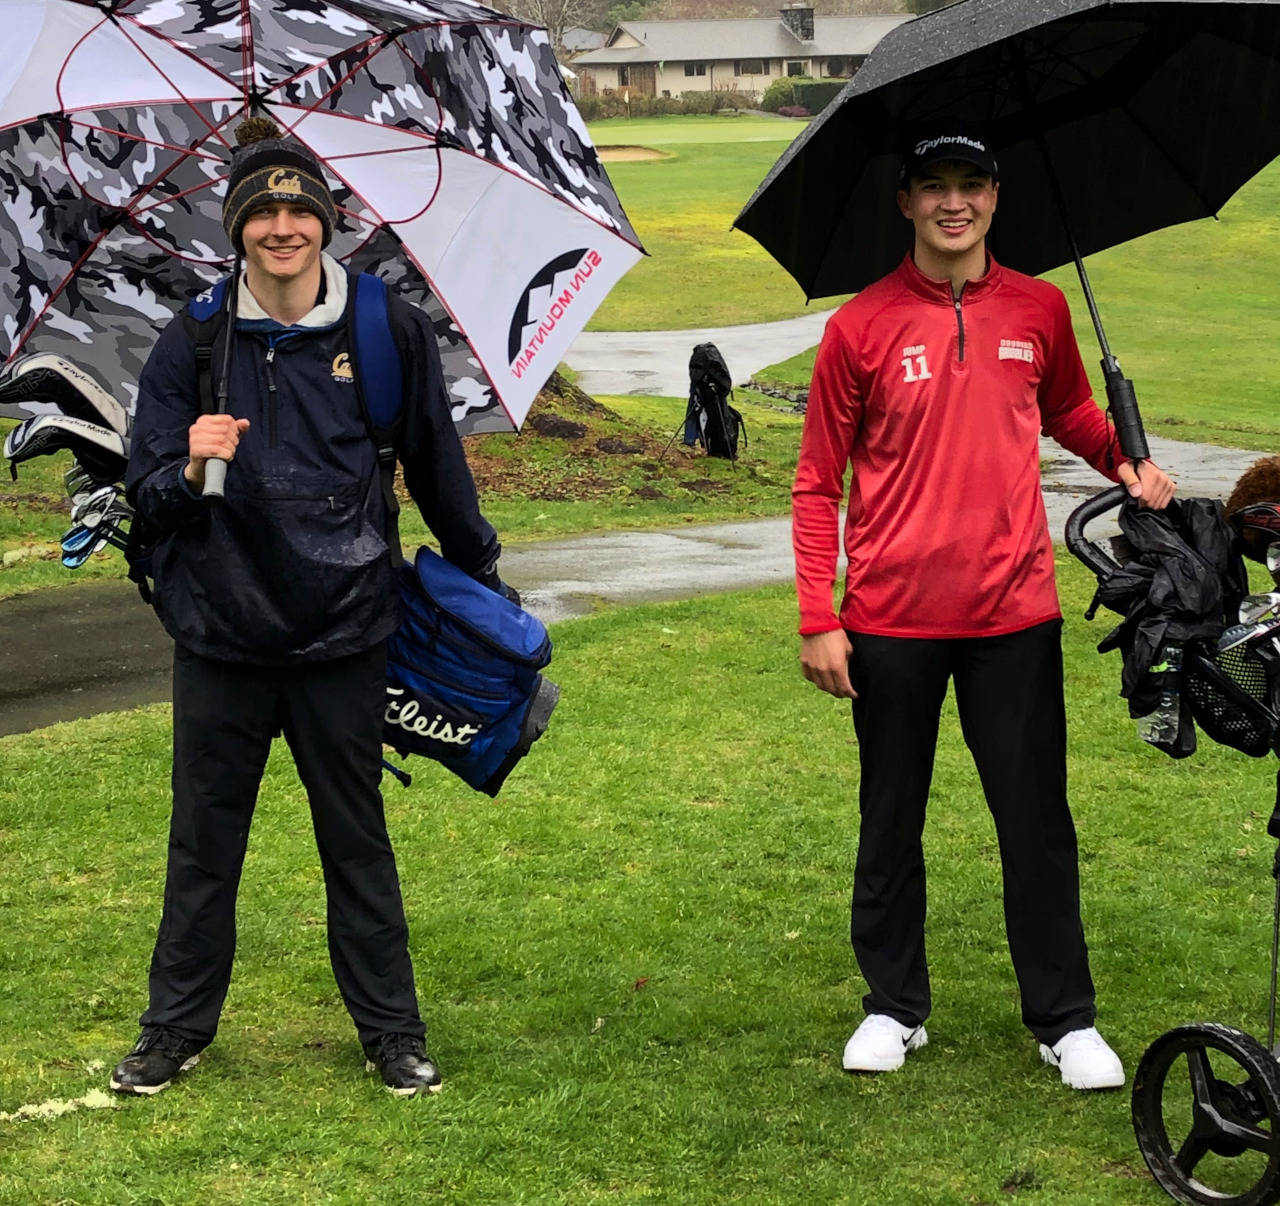 Aberdeen’s Nolan King, left, and Hoquiam’s Michael Jump pose for a photo after their respective teams met for a match on Thursday at Grays Harbor Country Club. Both will be competing for Grays Harbor Community College next season. (Submitted photo)